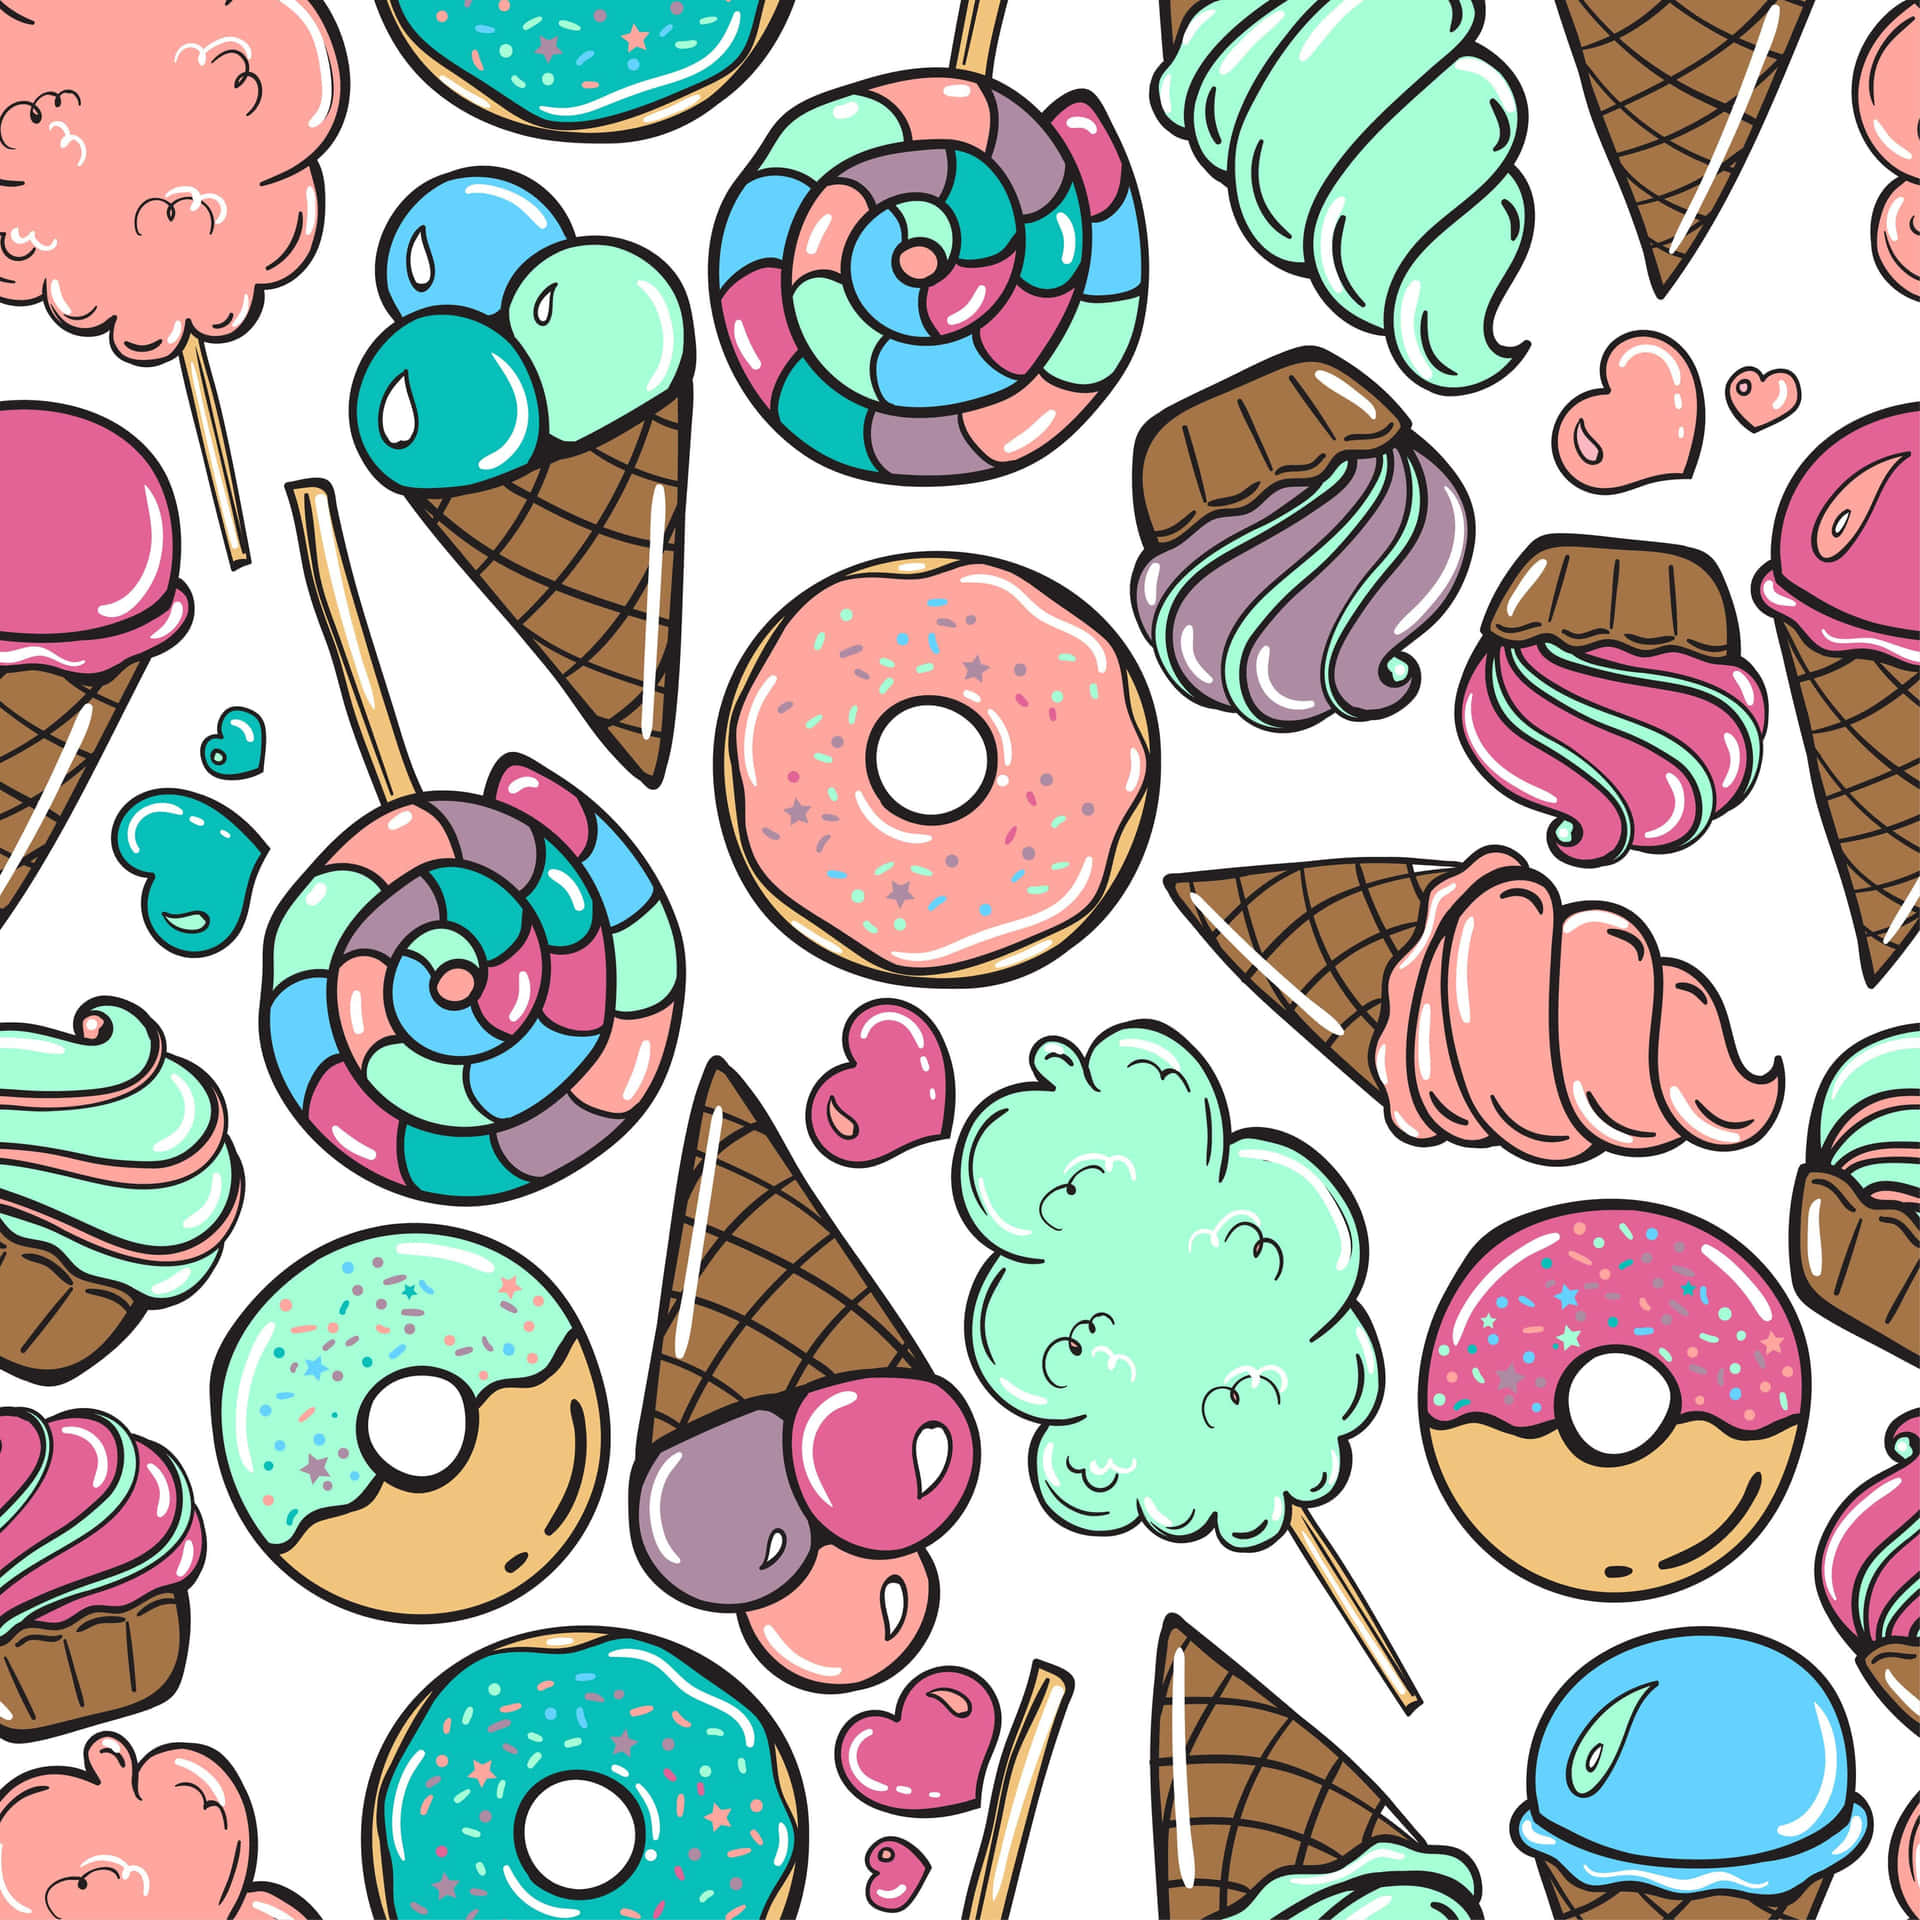 Delicious and Adorable Donut Wallpaper